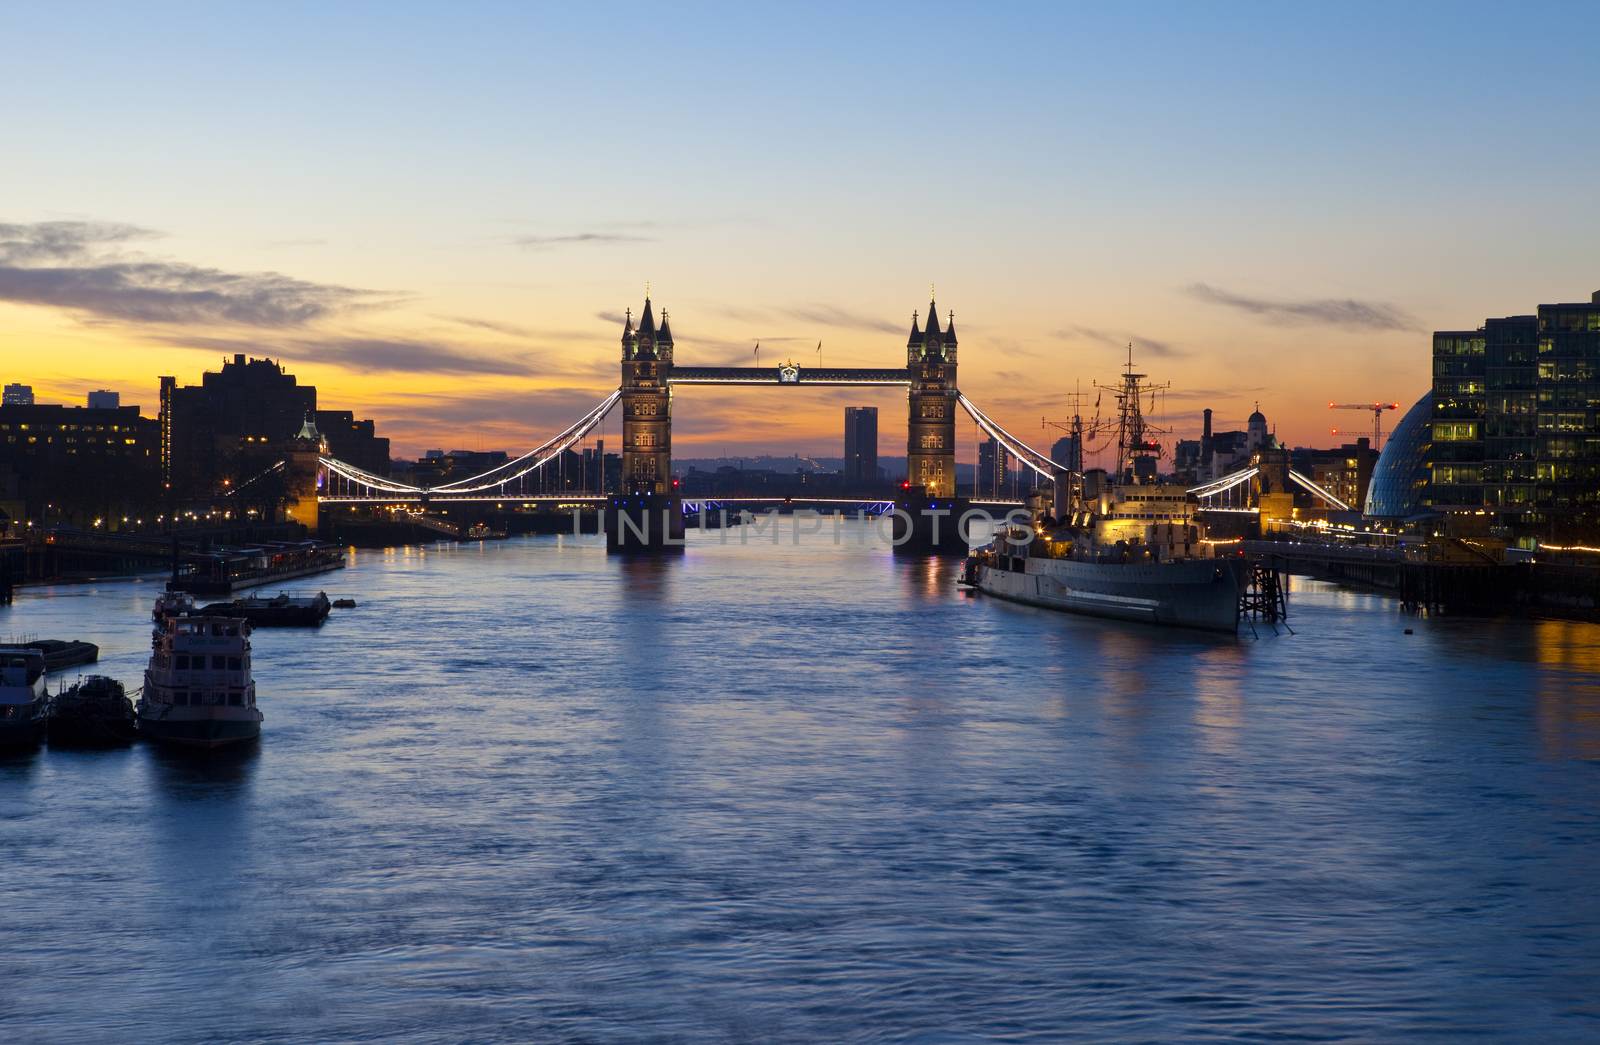 Sunrise in London with Tower Bridge, HMS Belfast, City Hall and the river Thames in the foreground.